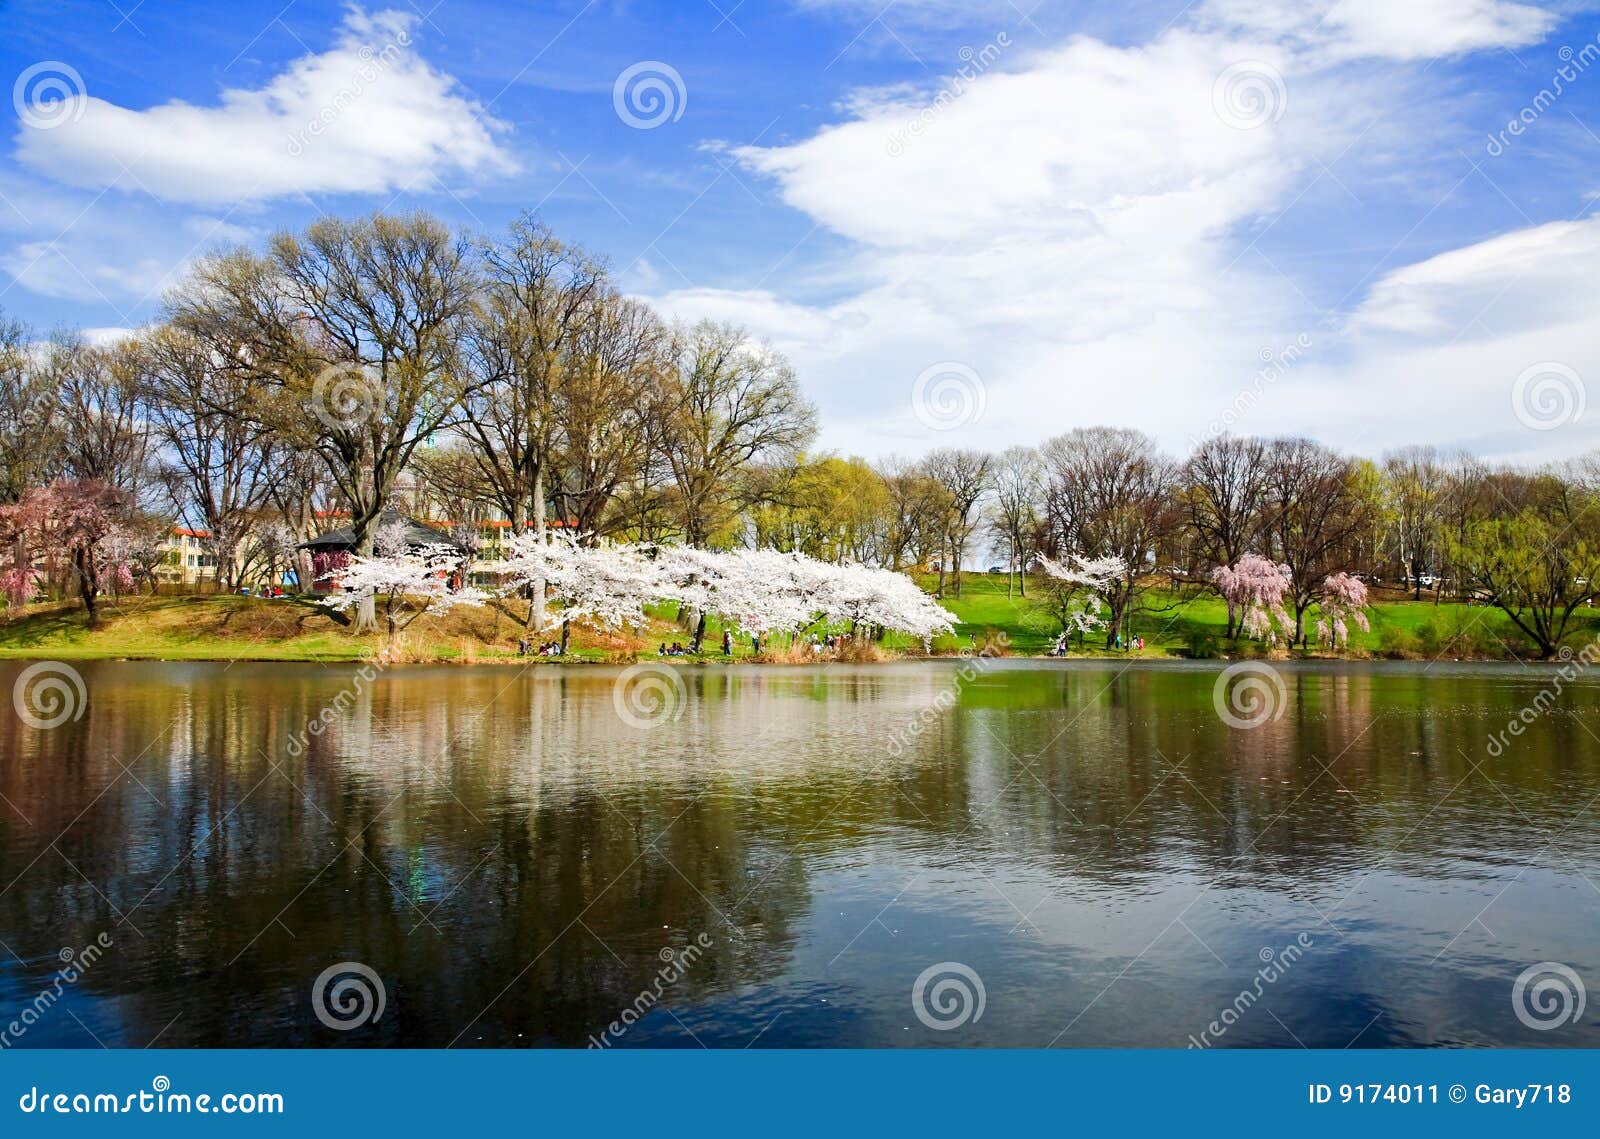 The Cherry Blossom Festival in New Jersey Stock Image Image of time